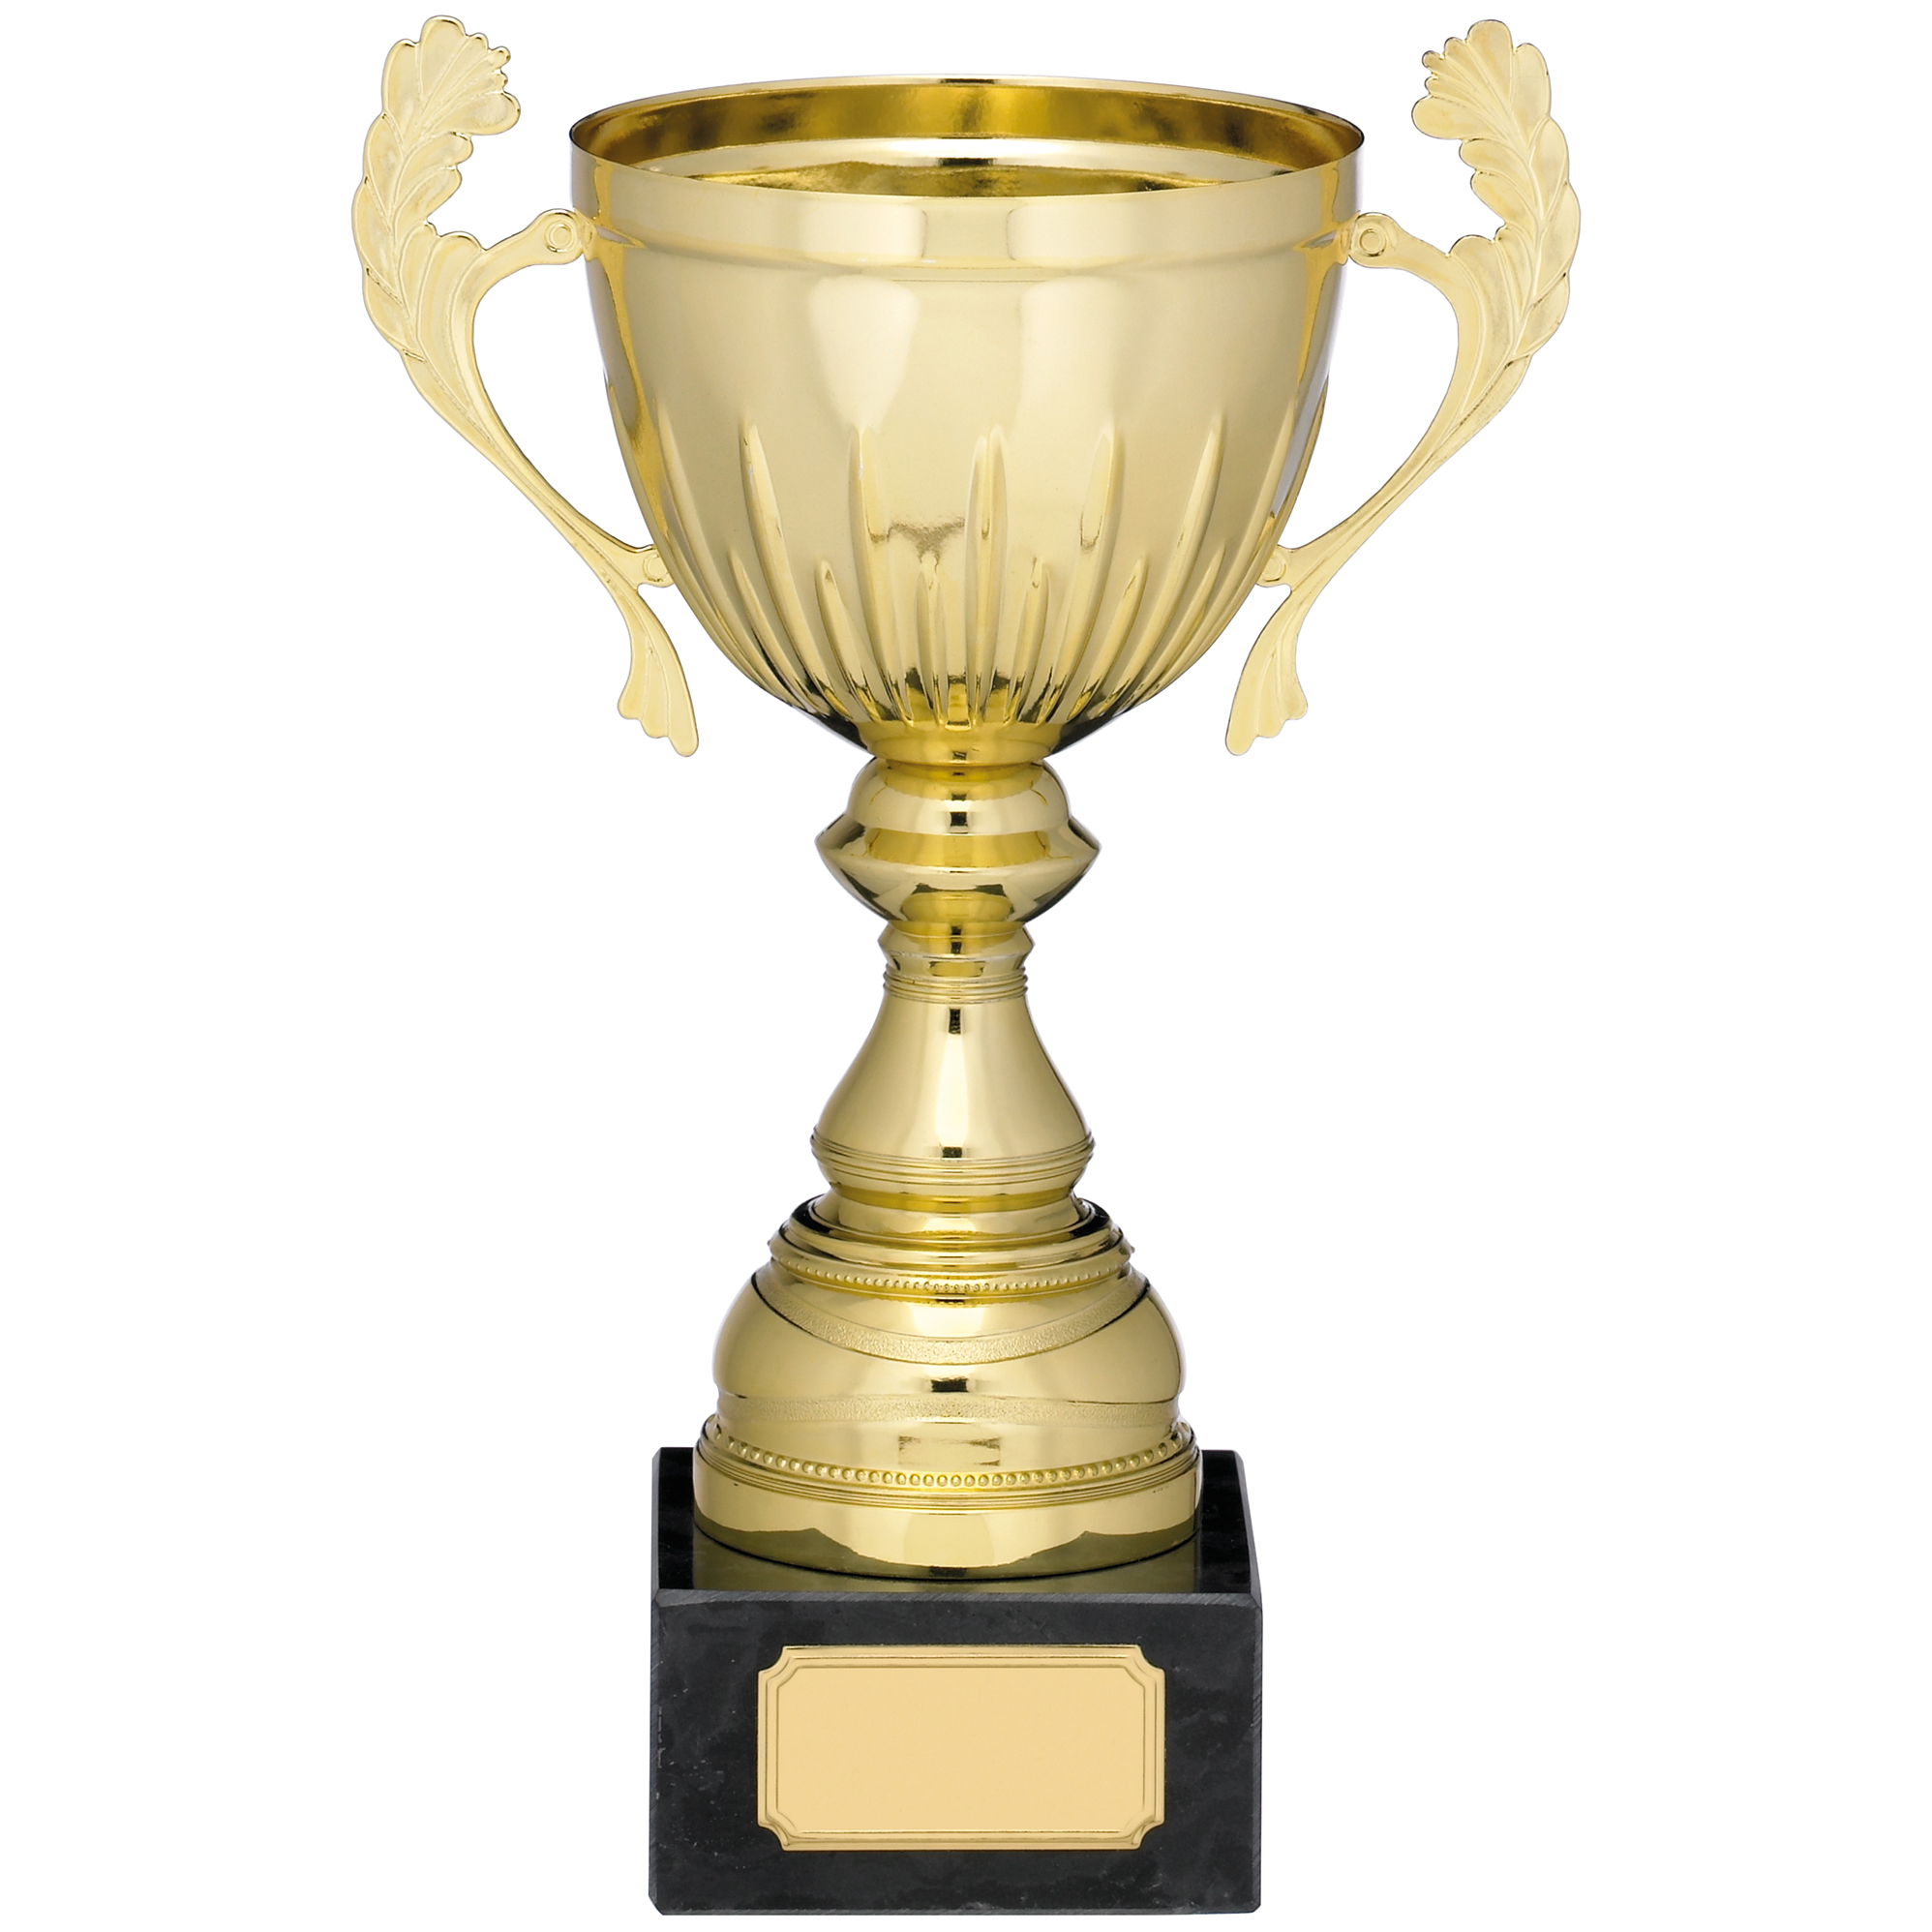 19cm GOLD CUP TROPHY WITH HANDLES